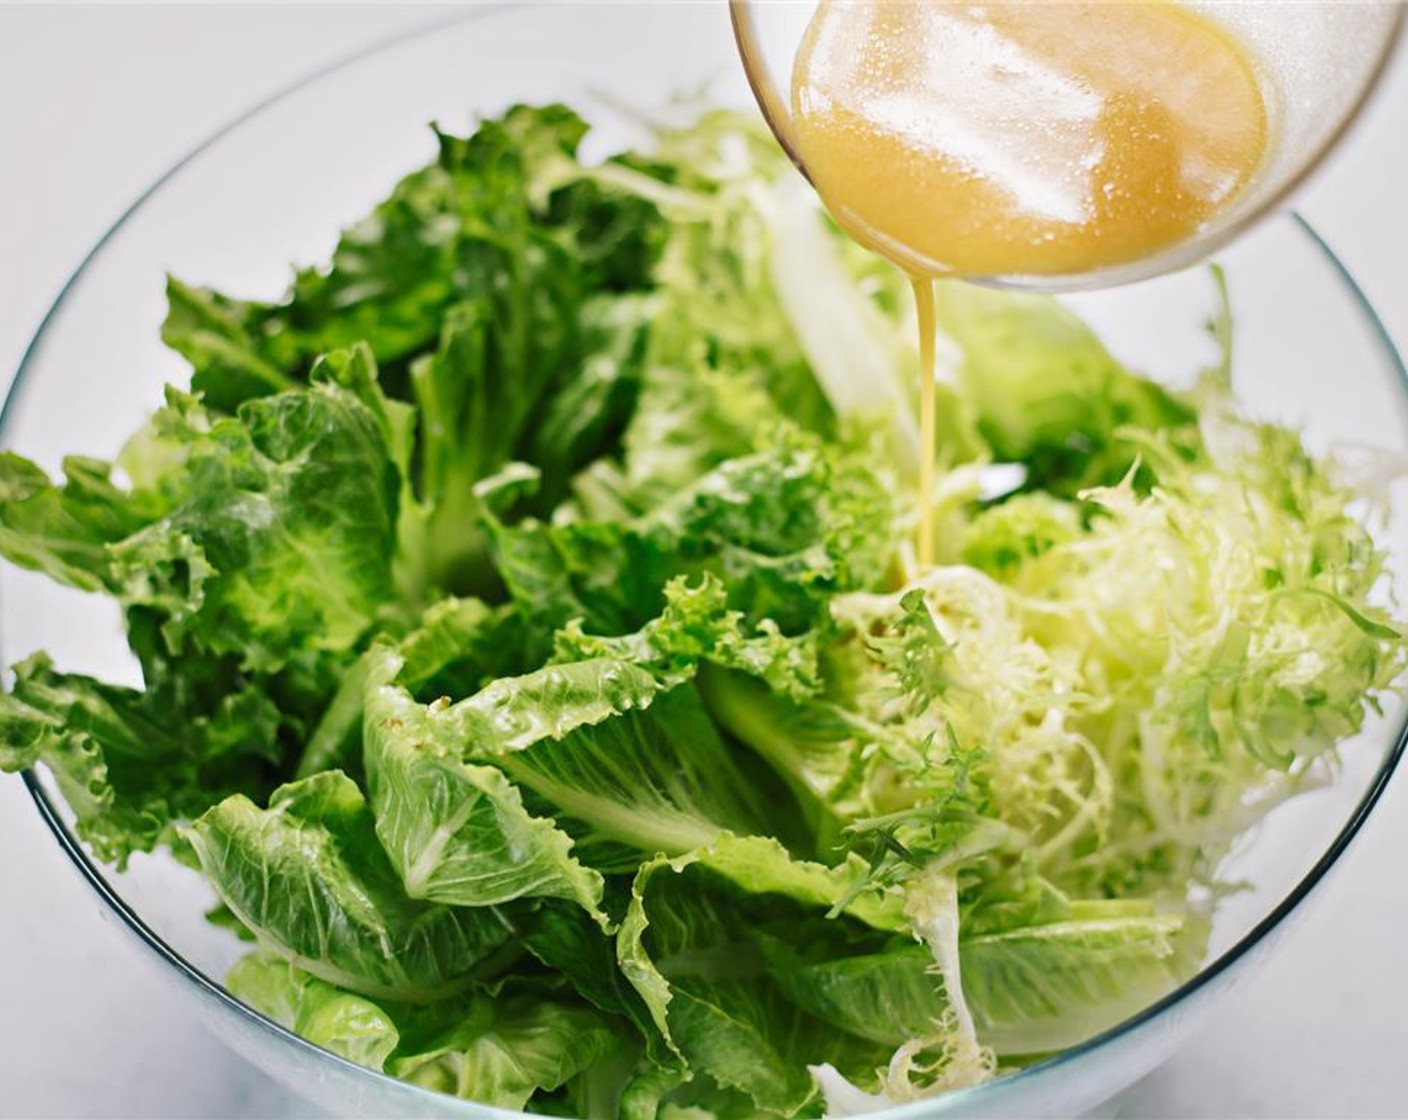 step 3 Top with your favorite Vinaigrette (1 cup).